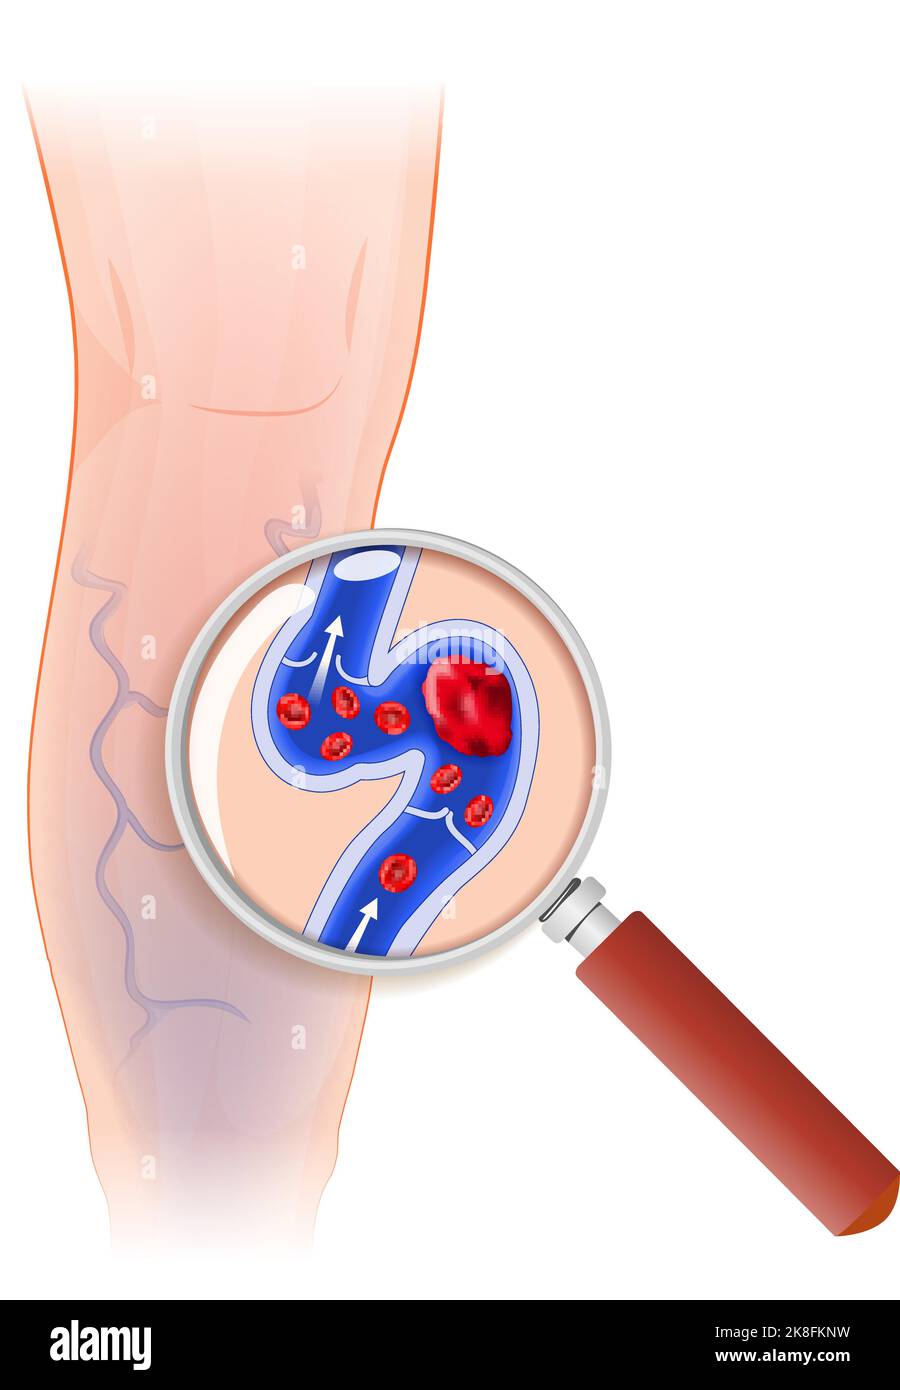 Human's leg affected by varicose veins. blue blood vessel visible through the skin. Cross section of varicose vein through a magnifying glass Stock Vector